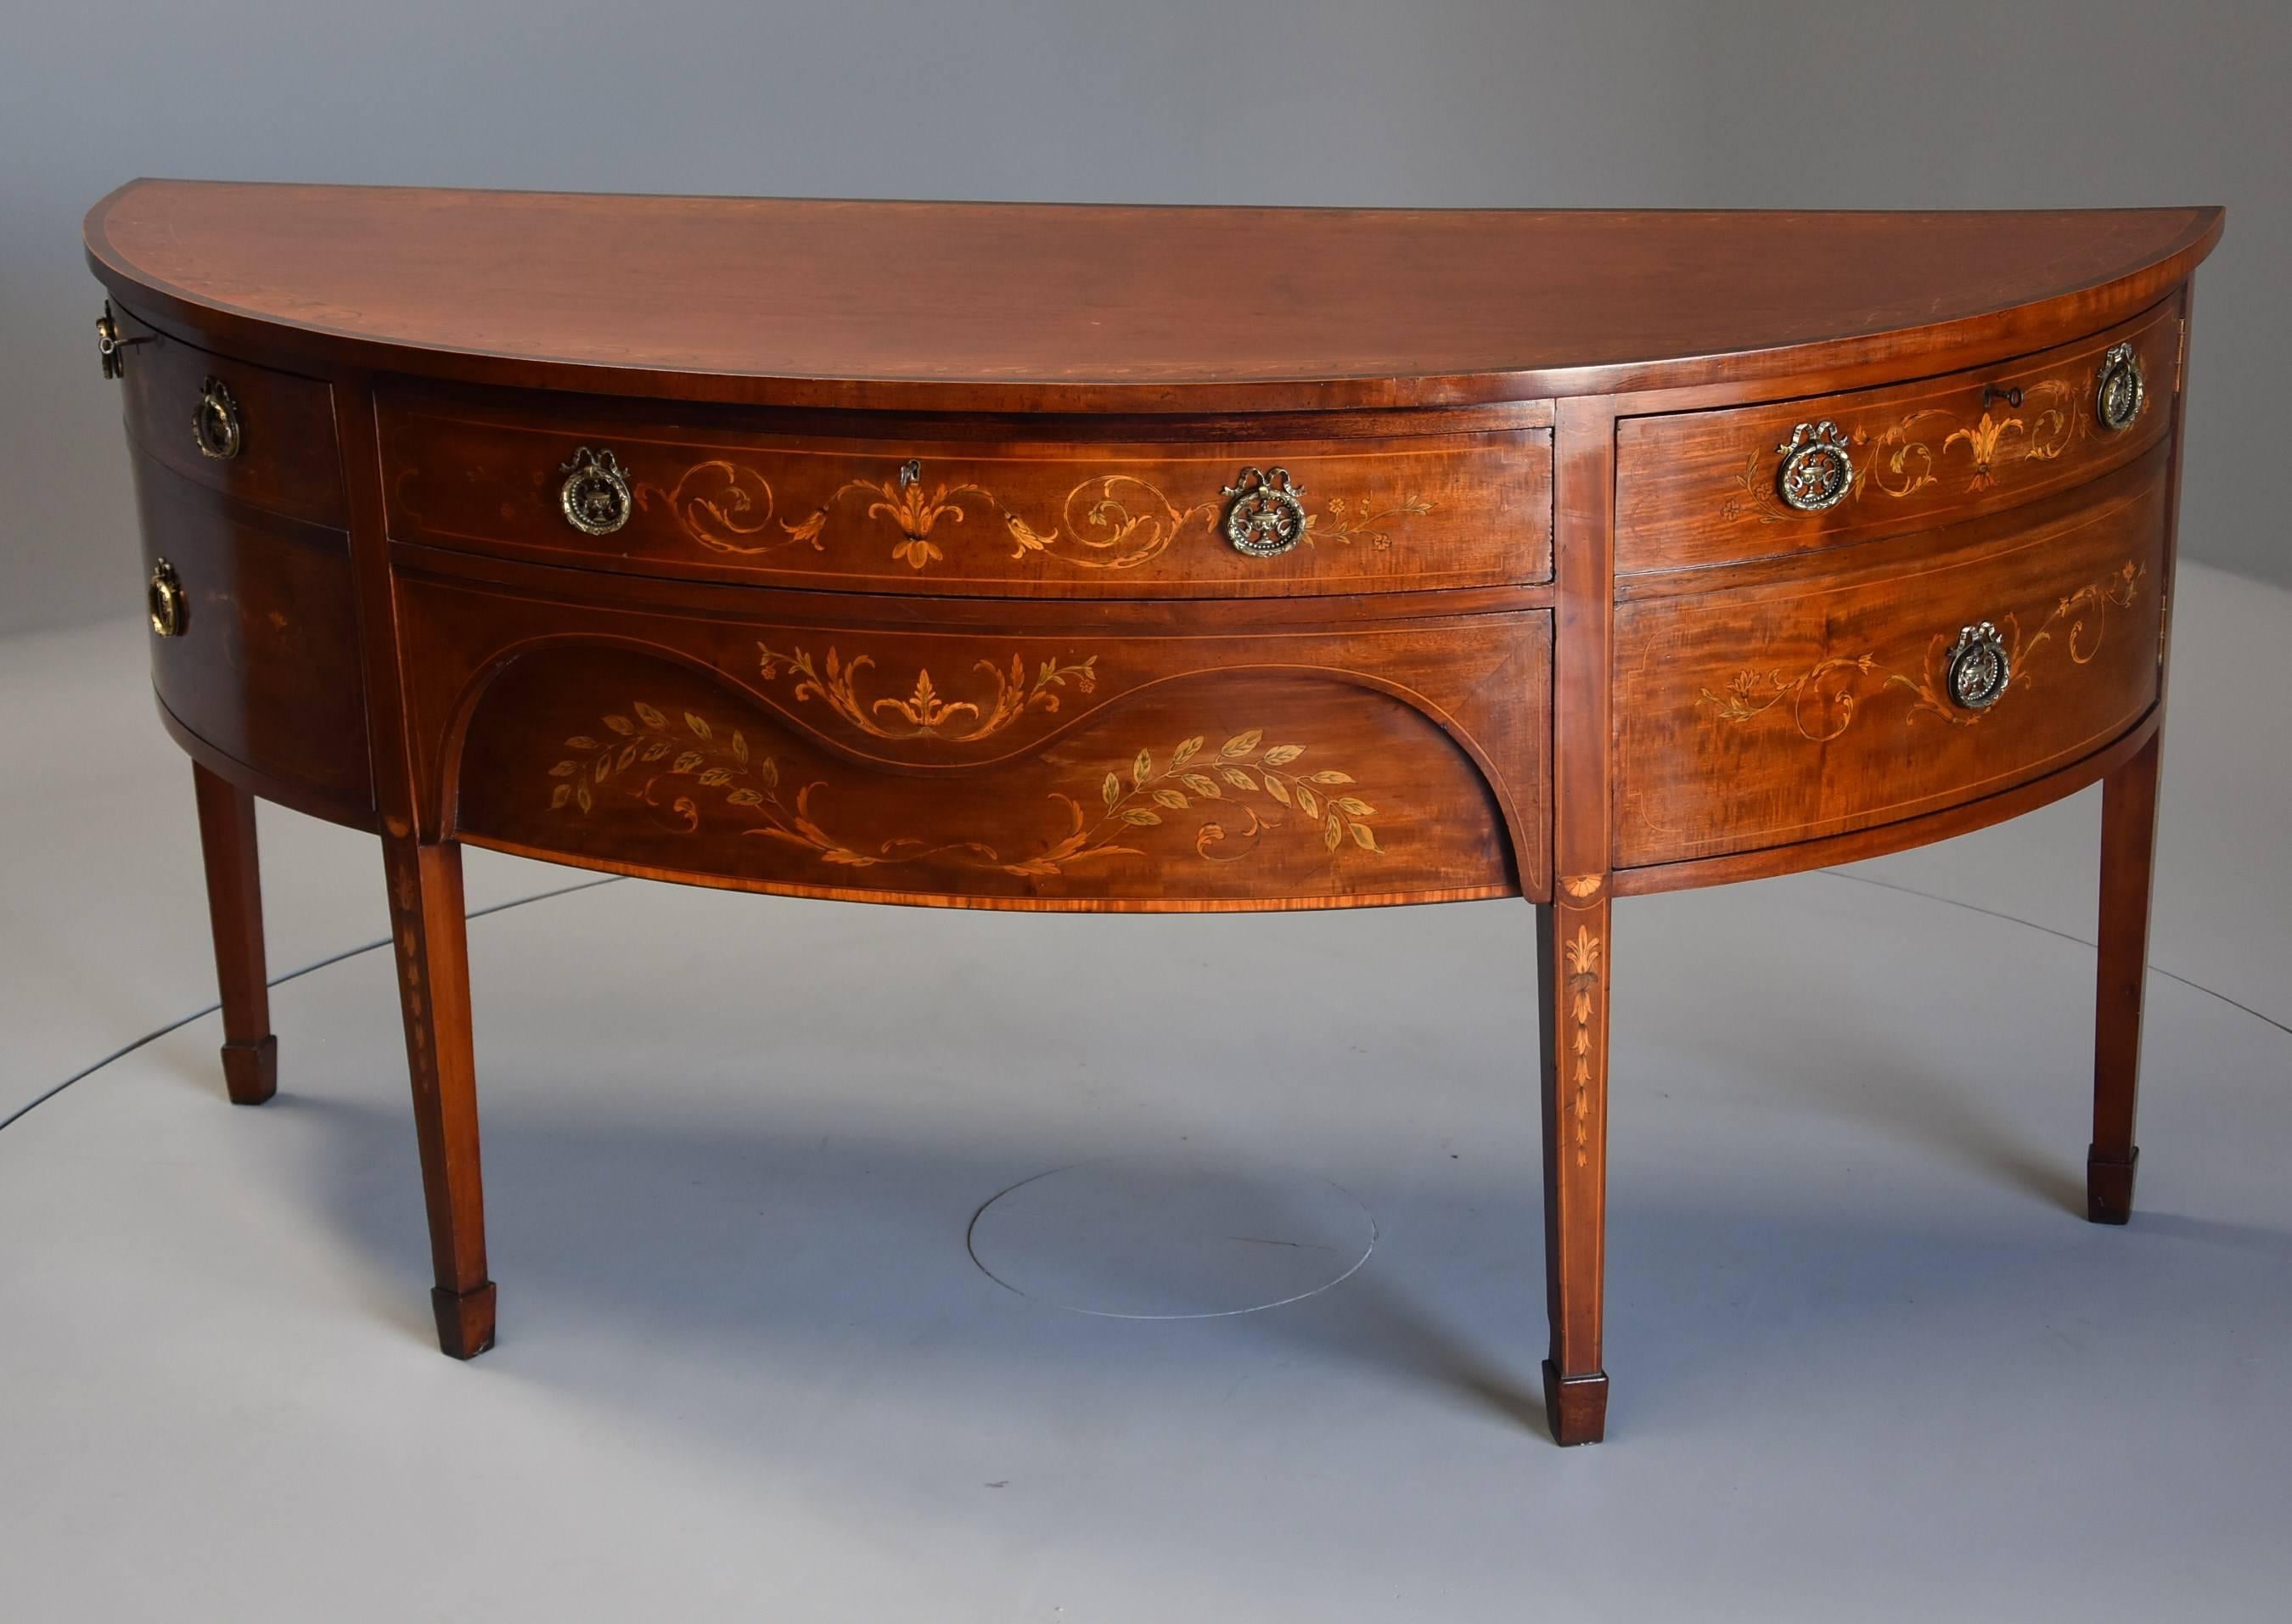 Sheraton Fine Quality Edwardian Mahogany & Inlaid Bow Front Sideboard by Druce & Co